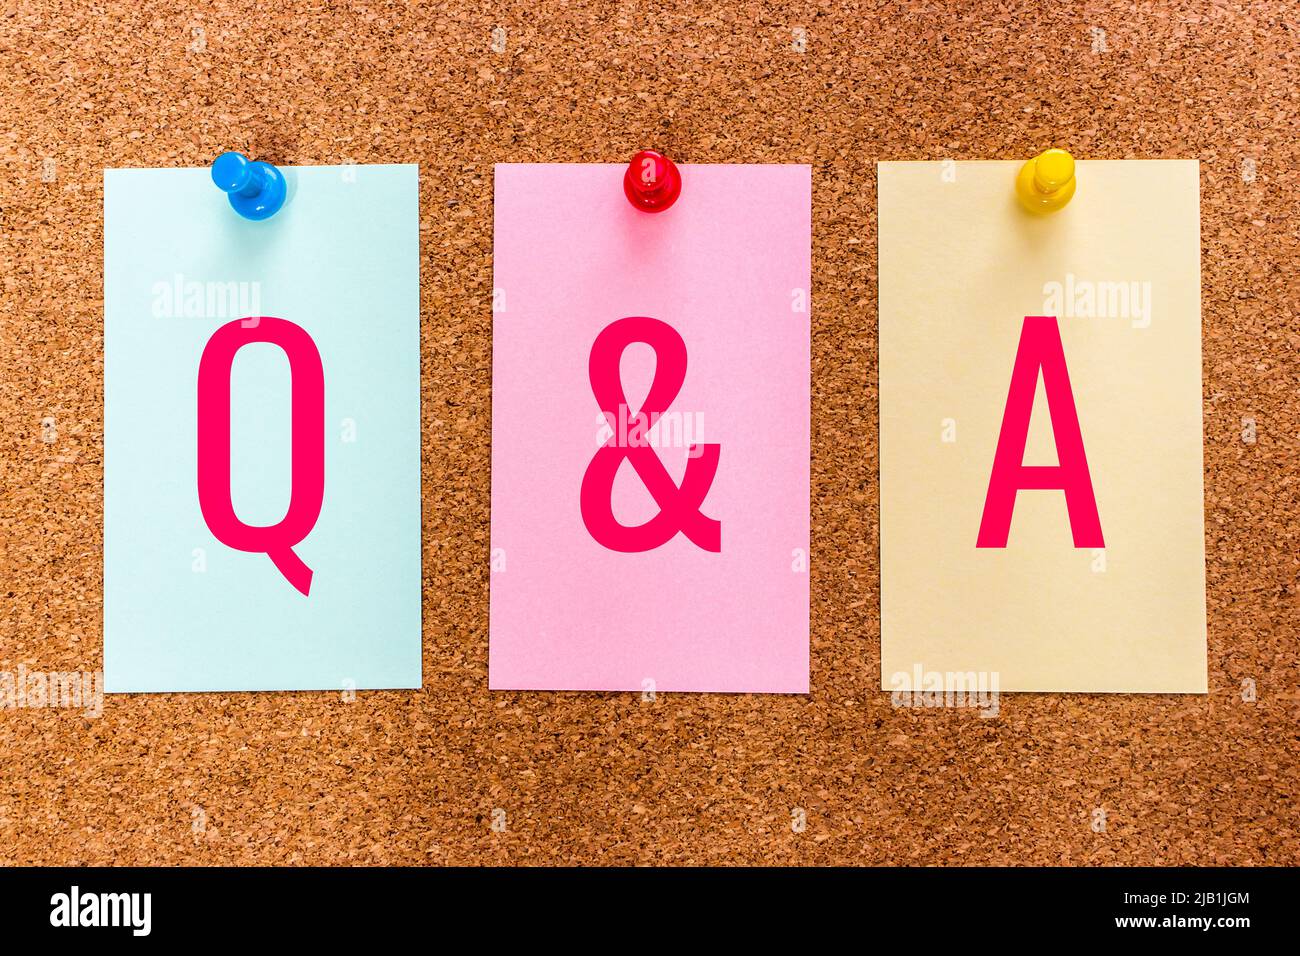 Conceptual 3 letter keyword Q AND A (Question And Answer) on multicolored stickers attached to a cork board. Stock Photo